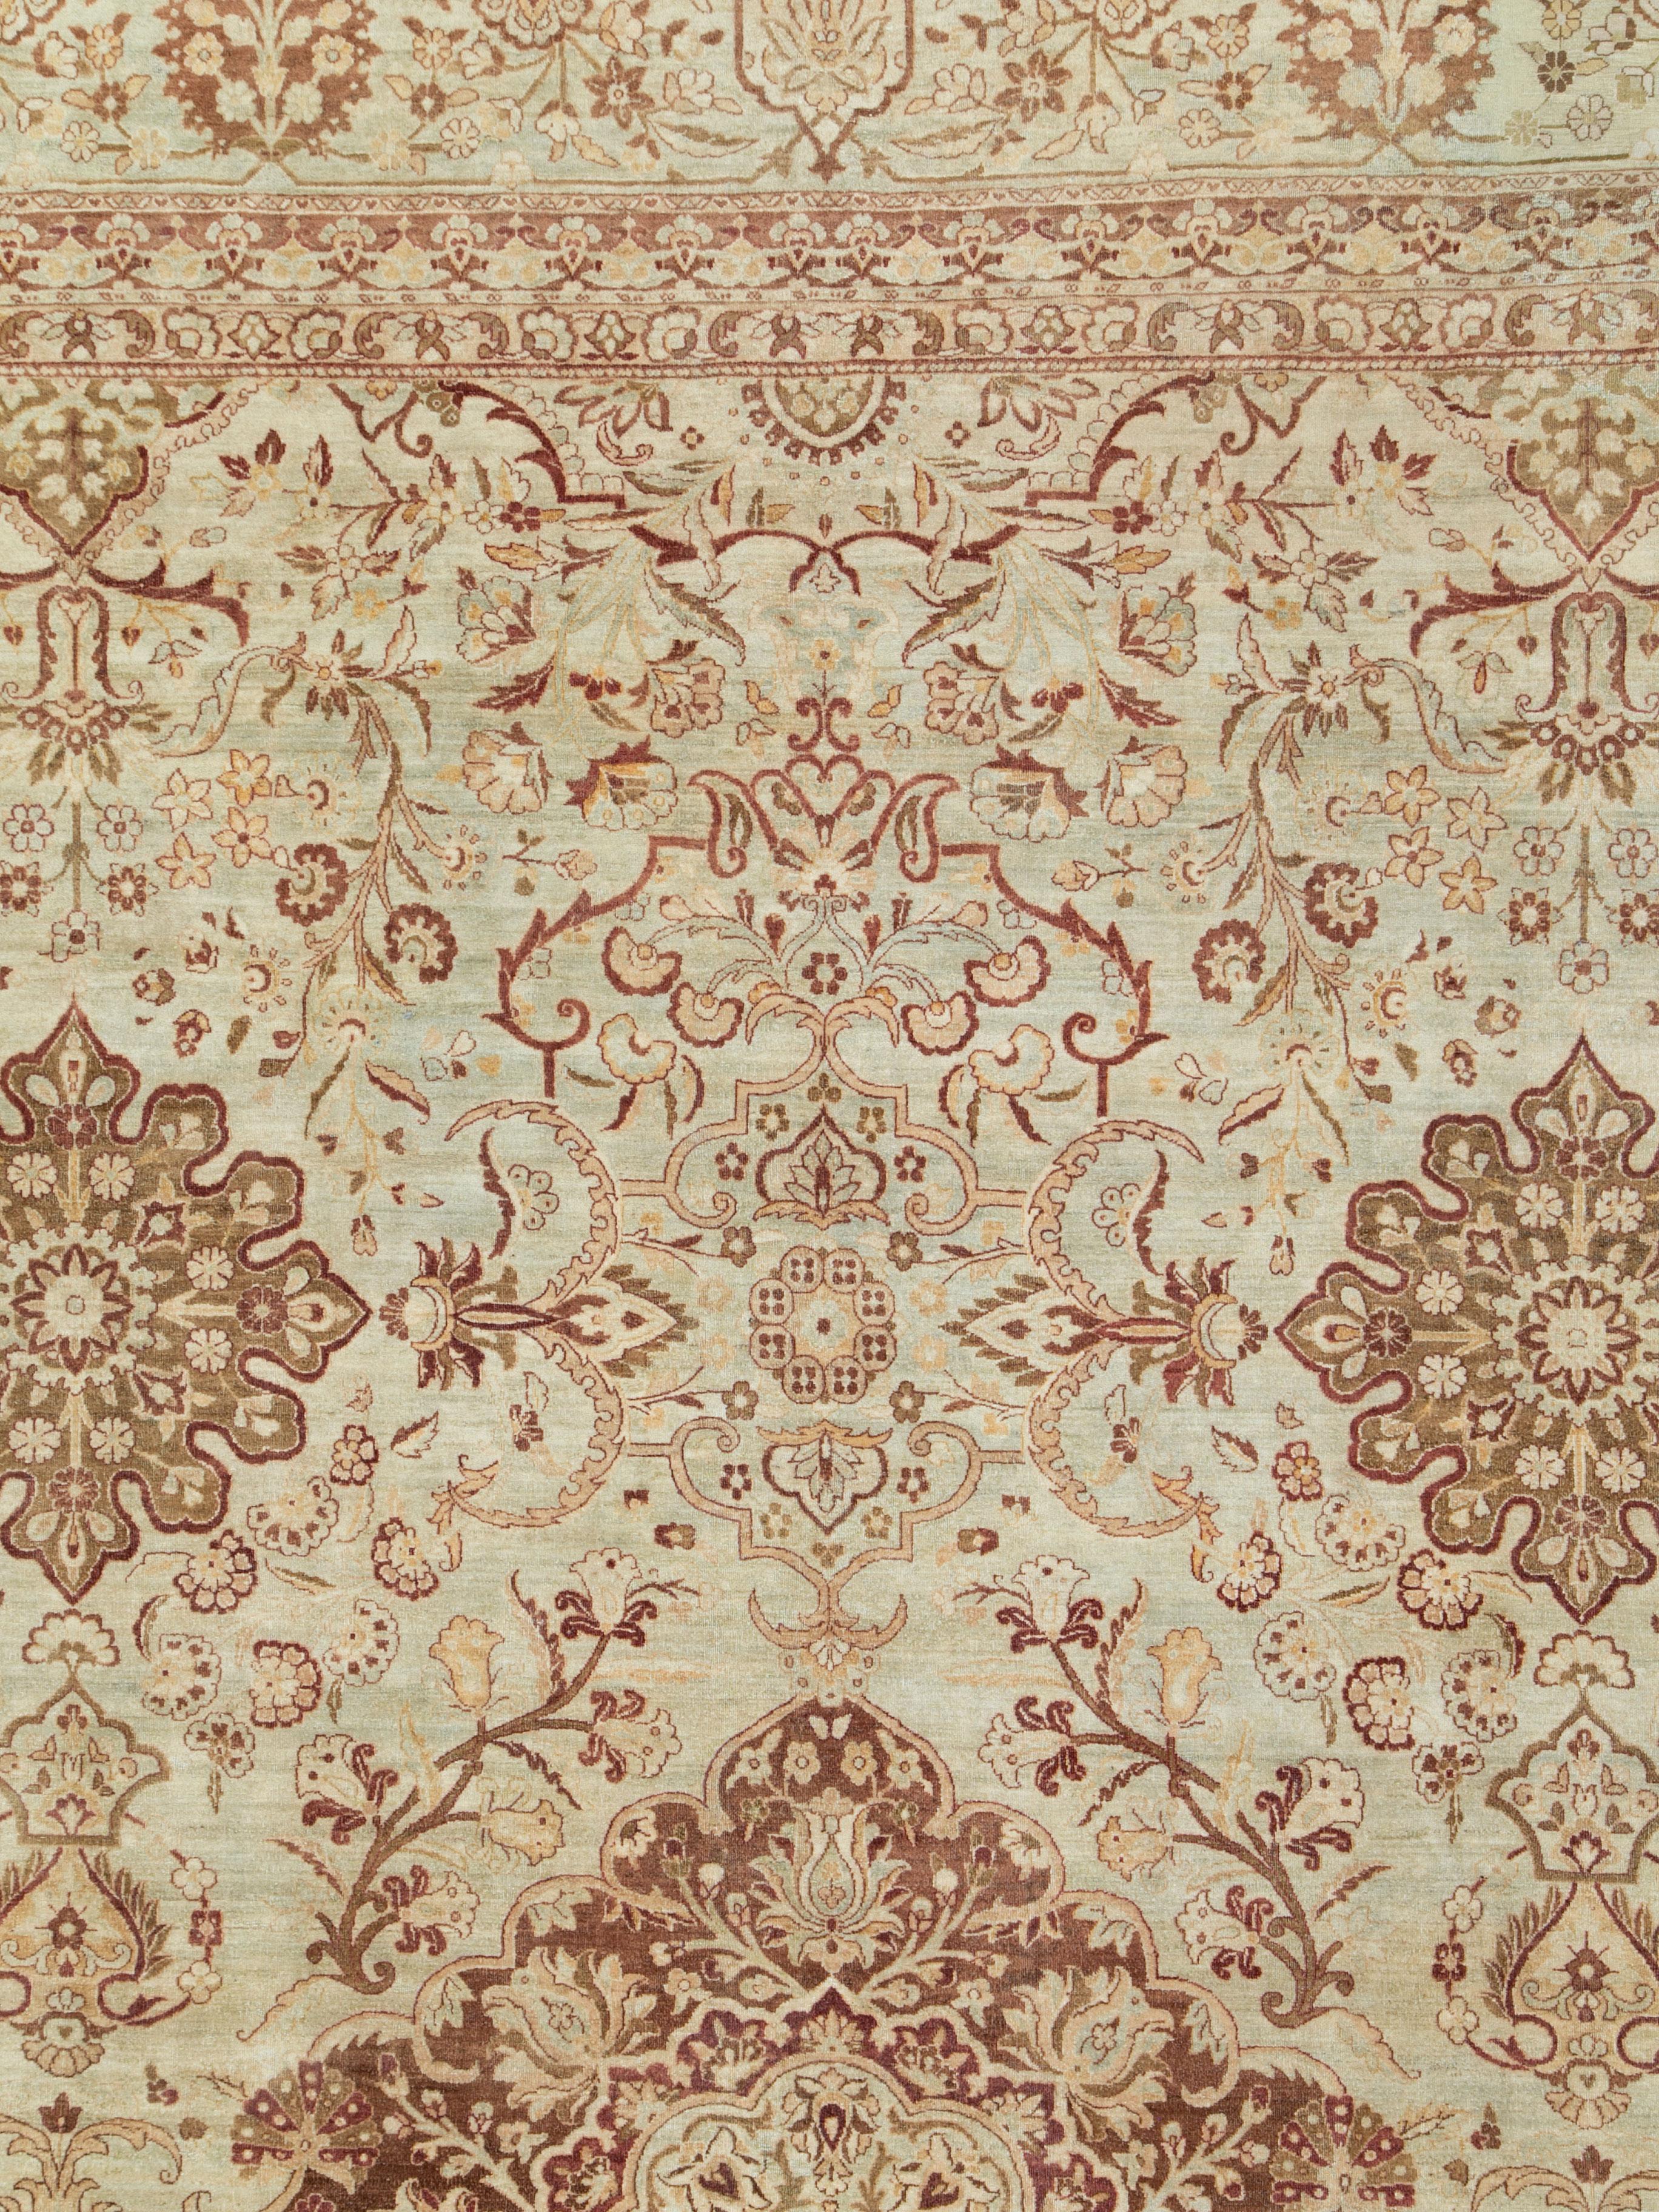 An antique Persian Lavar Kerman carpet from the early 20th century.